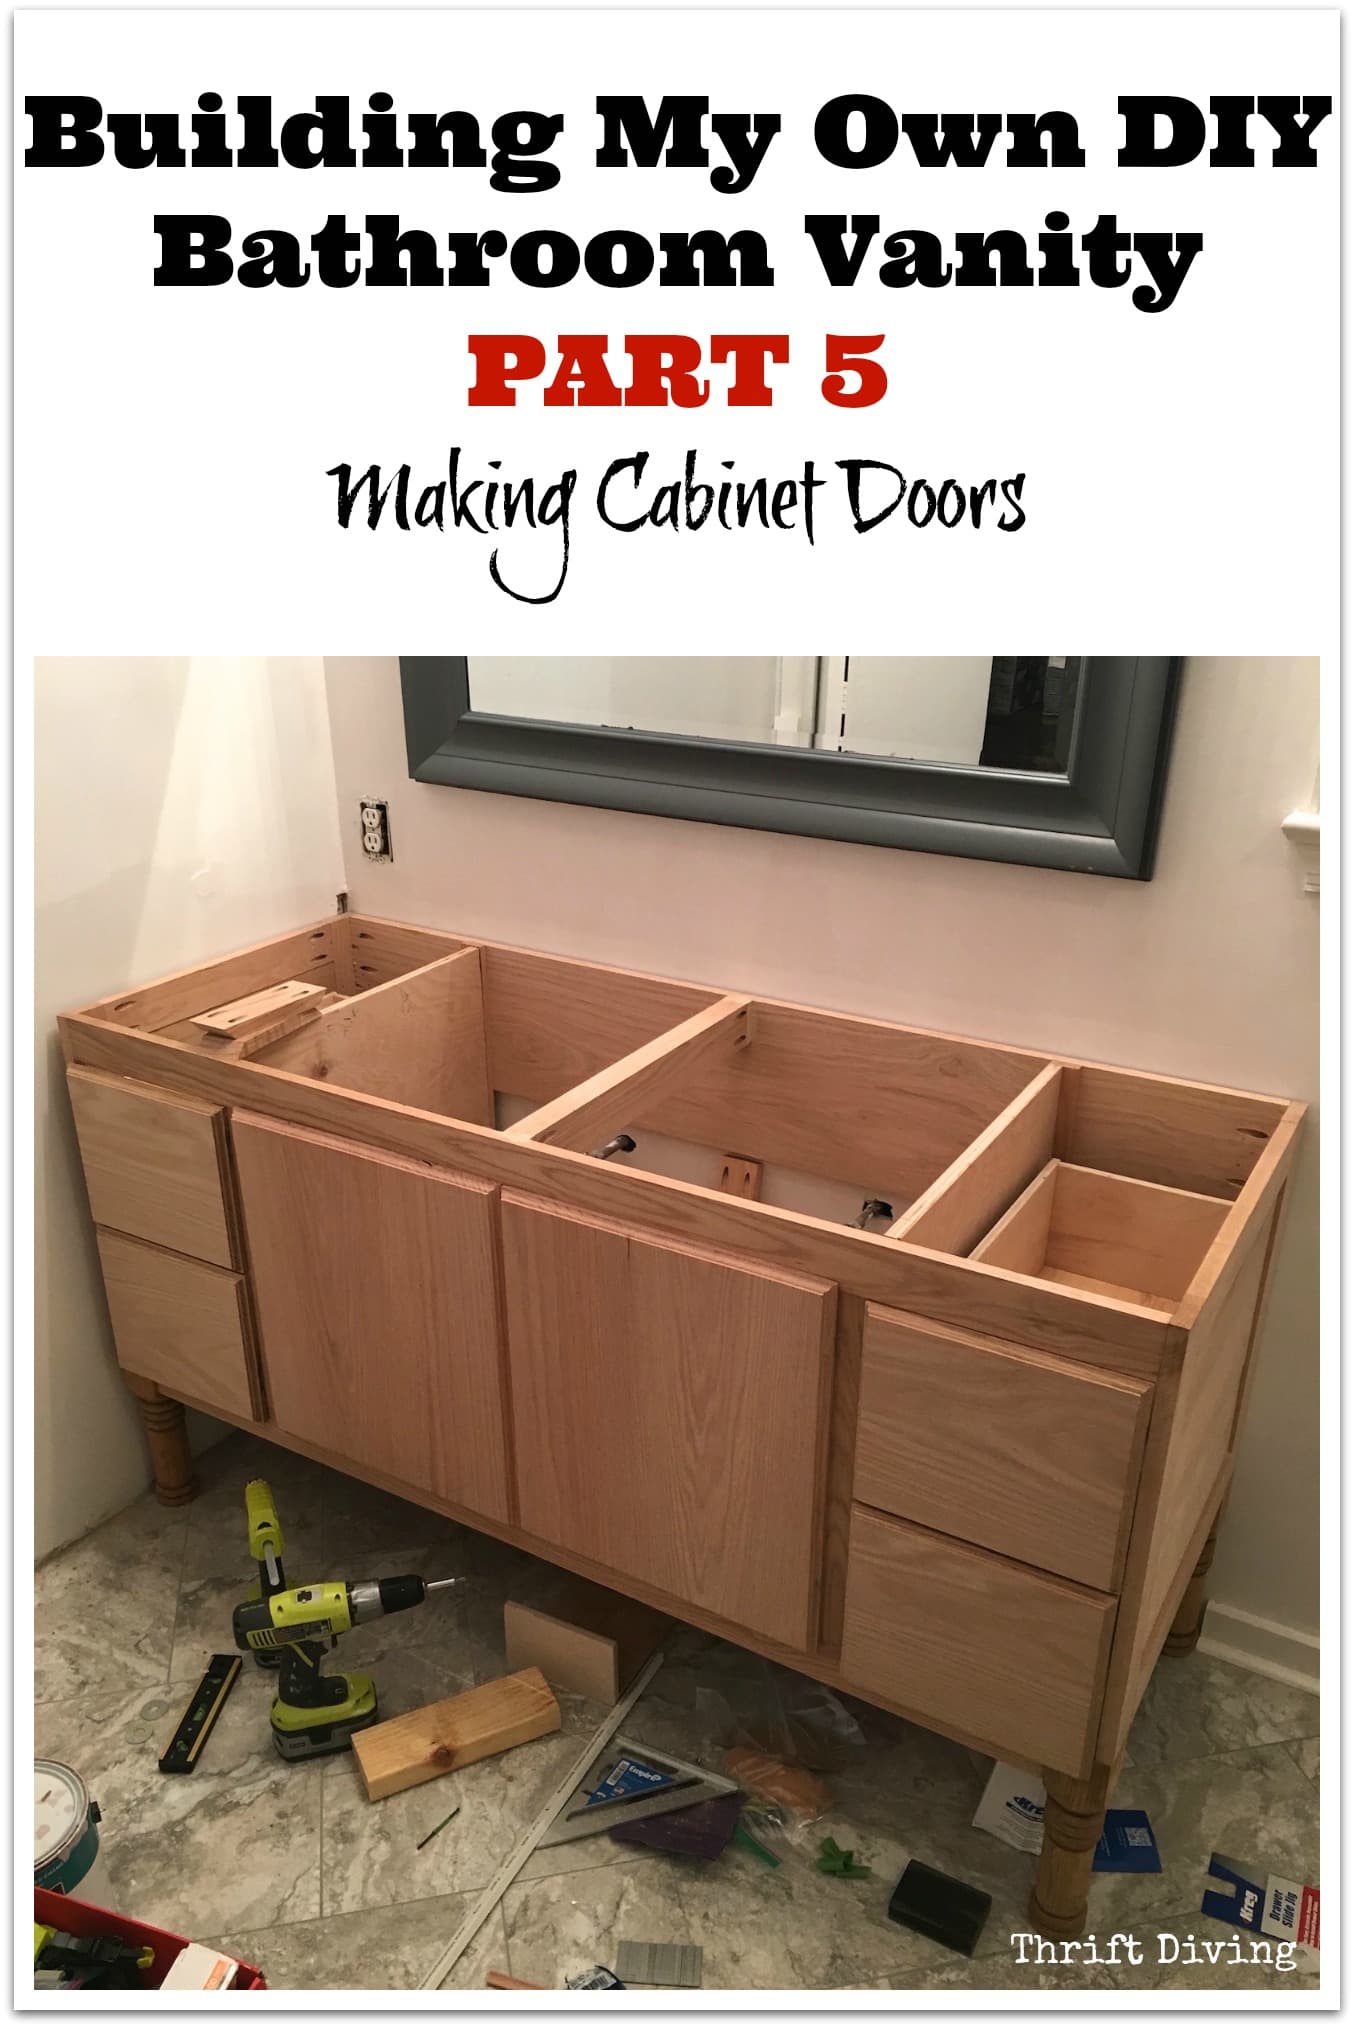 Building My Own DIY Bathroom Vanity - Part 5 - Making Cabinet Doors. See how it was done. Thrift Diving